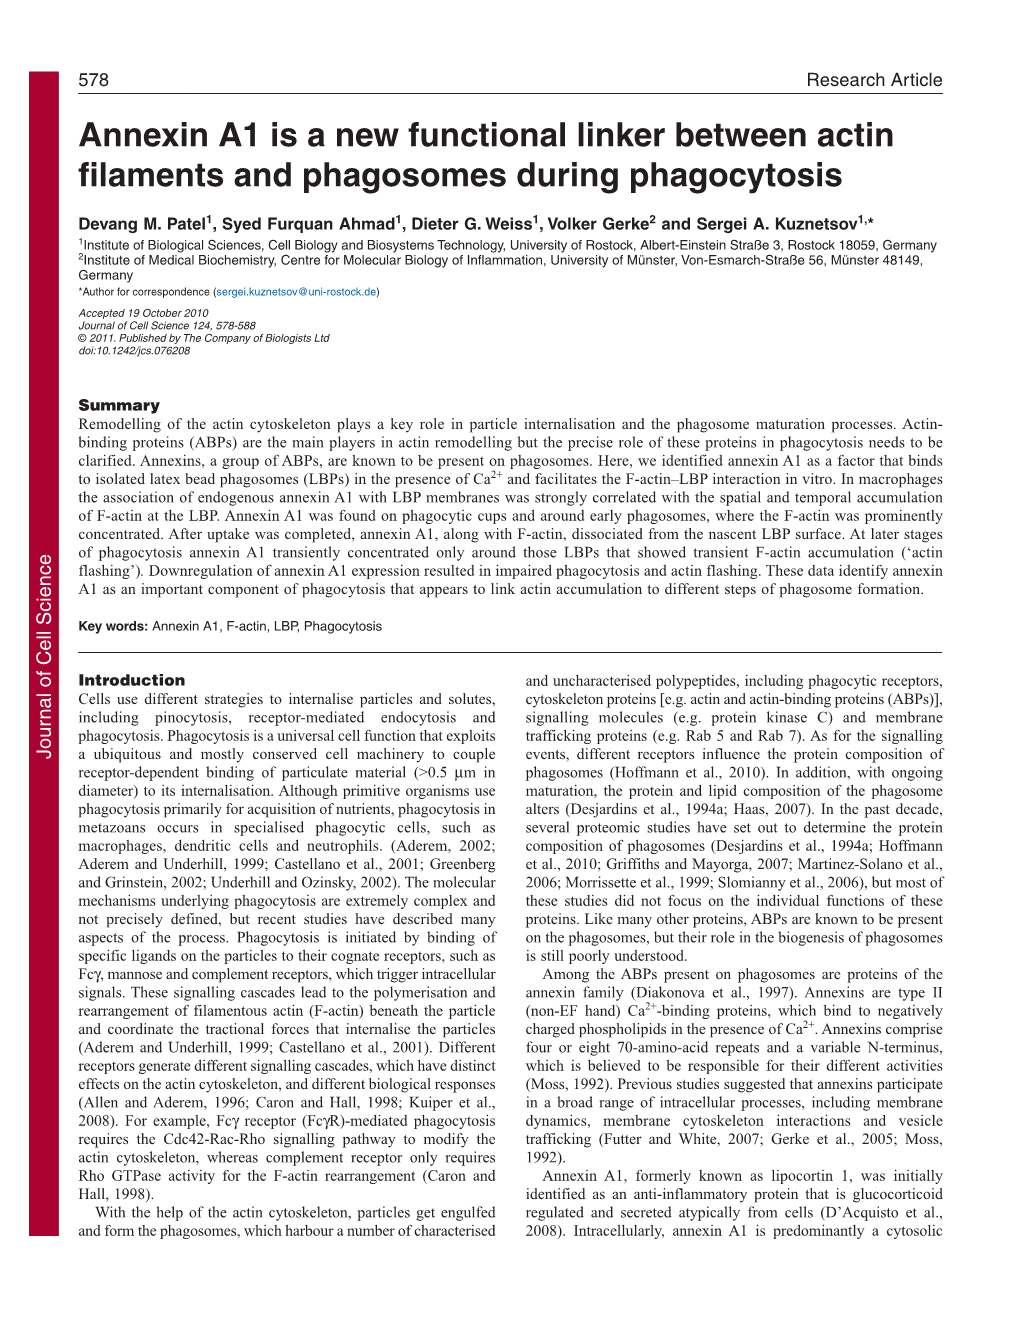 Annexin A1 Is a New Functional Linker Between Actin Filaments and Phagosomes During Phagocytosis